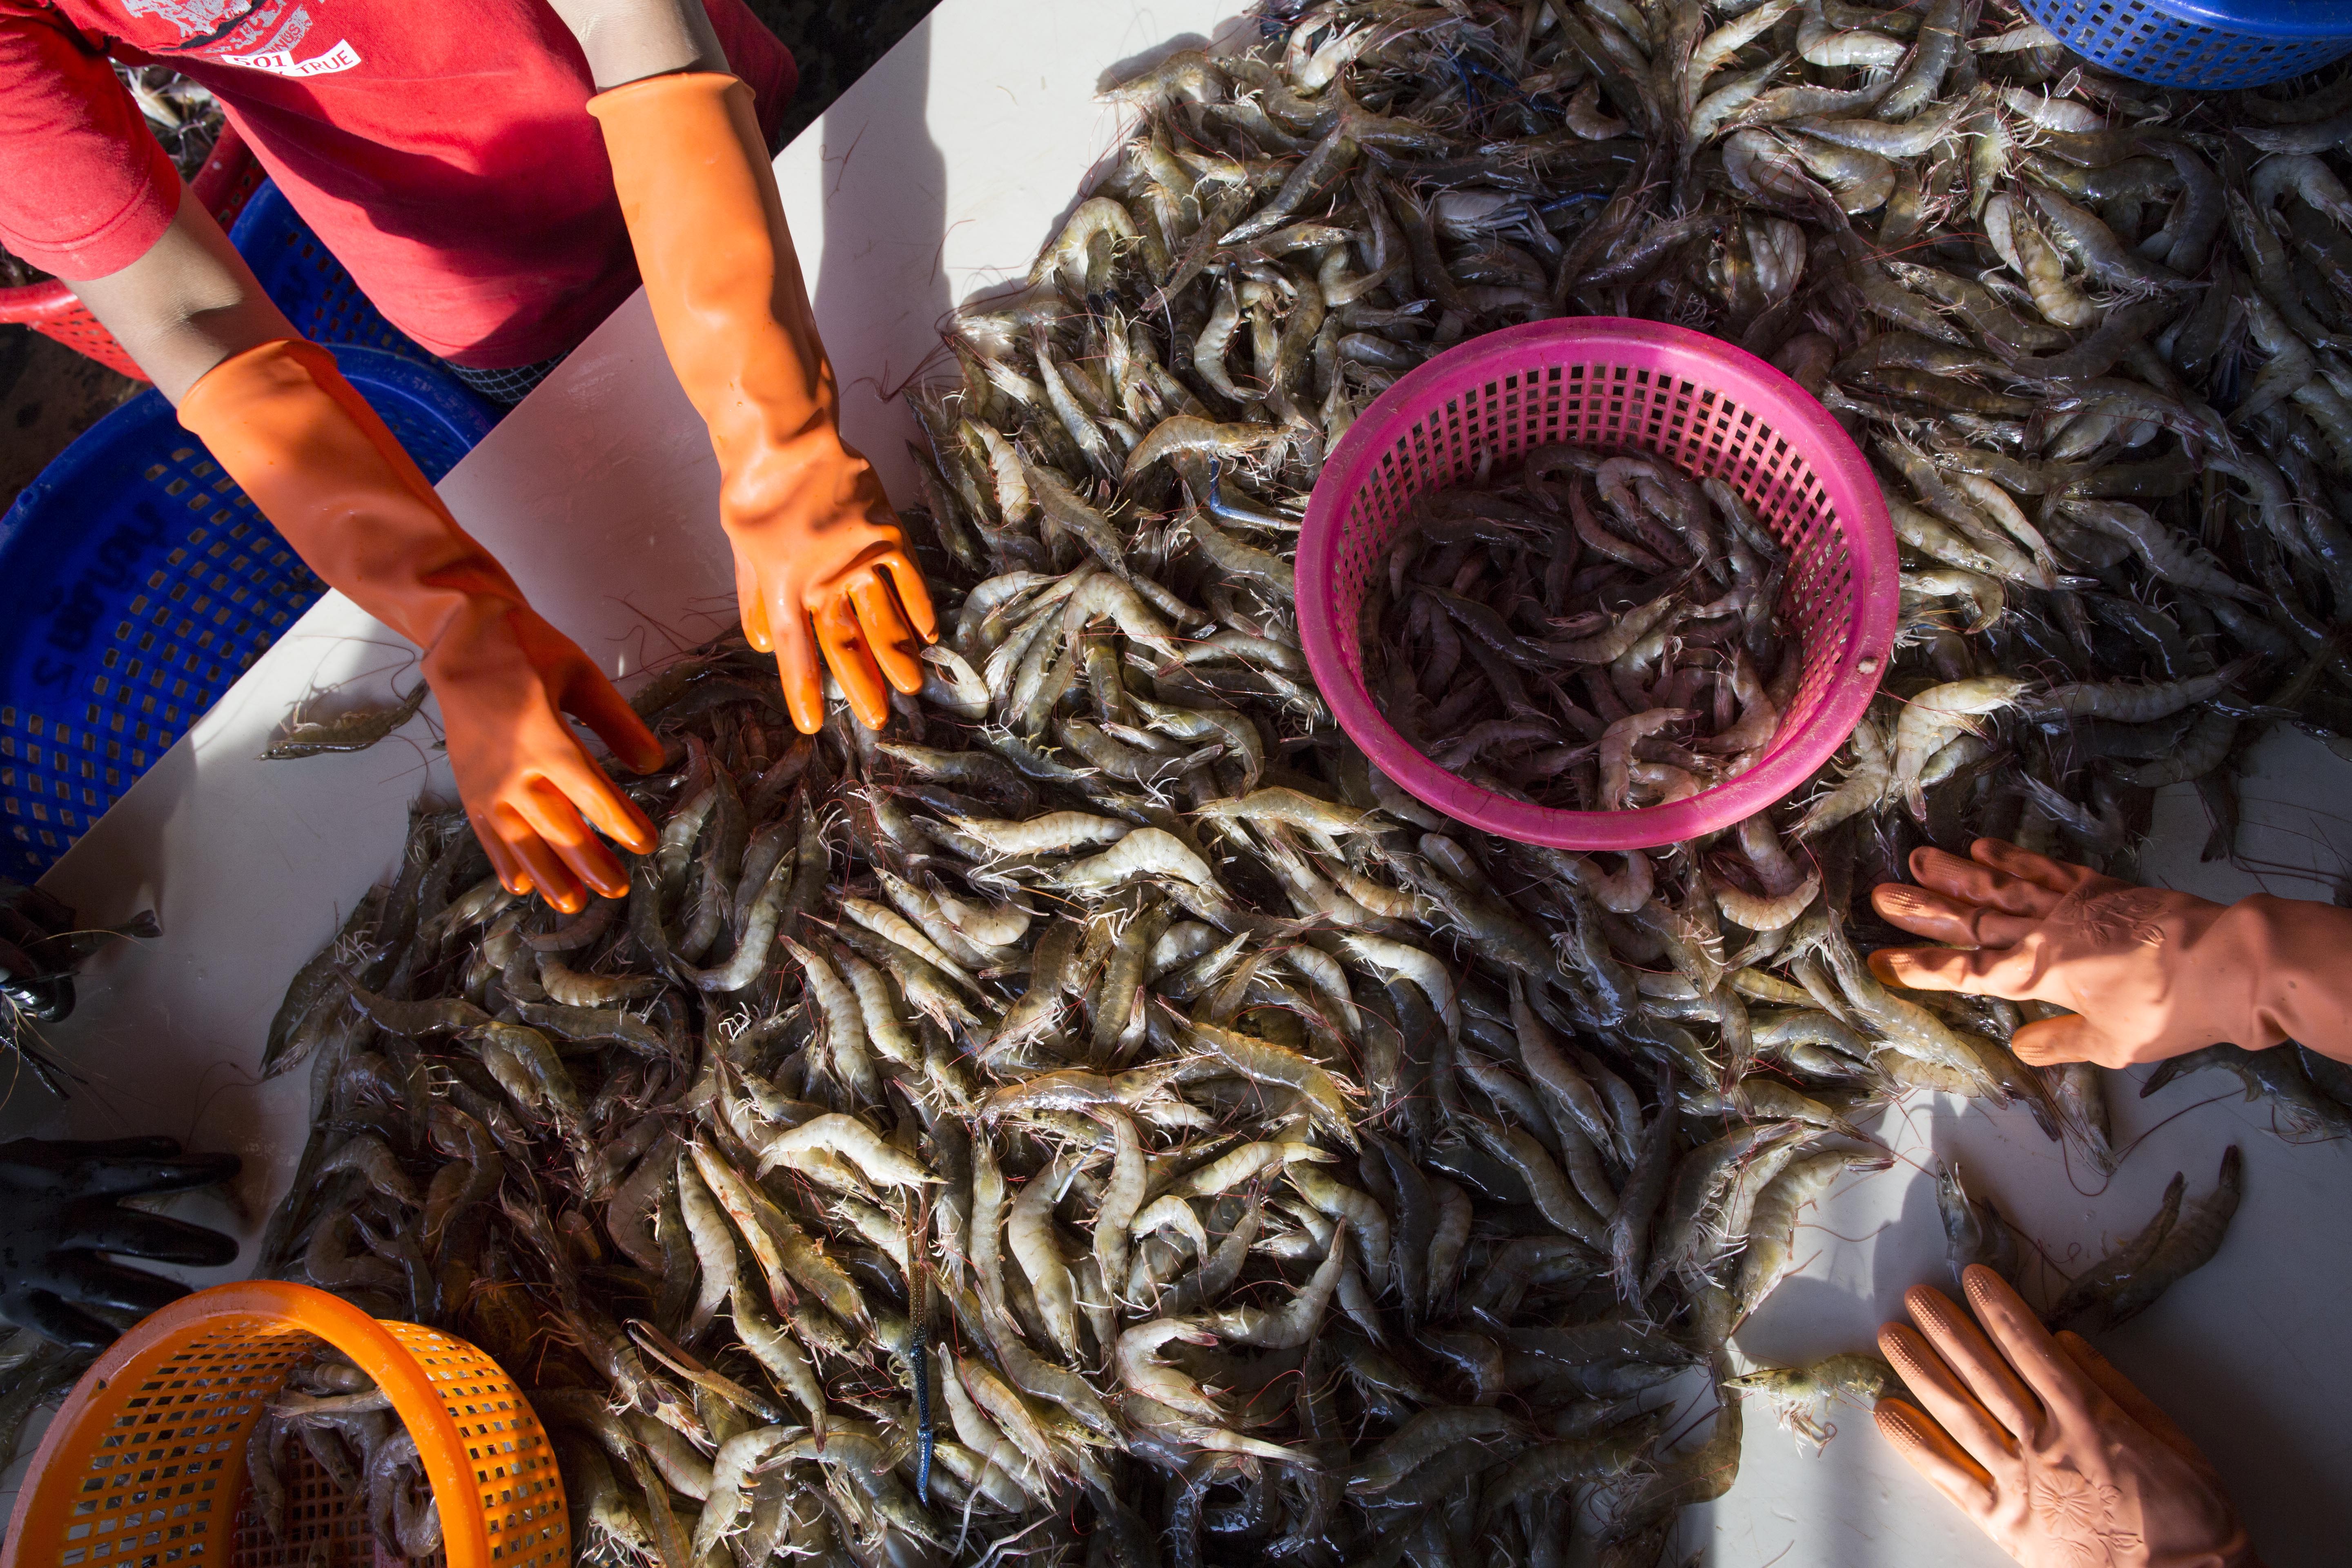 ADVANCE FOR USE MONDAY, DEC. 14, 2015 AT 12:01 A.M. EST (05:01 GMT) AND THEREAFTER - In this Wednesday, Sept. 30, 2015 photo, female workers sort shrimp at a seafood market in Mahachai, Thailand. Shrimp is the most-loved seafood in the U.S., with Americans downing 1.3 billion pounds every year, or about 4 pounds per person. Once a luxury reserved for special occasions, it became cheaper when farmers in Asia started growing it in ponds three decades ago. Thailand quickly dominated the market and now sends nearly half of its supply to the U.S. (AP Photo/Gemunu Amarasinghe)